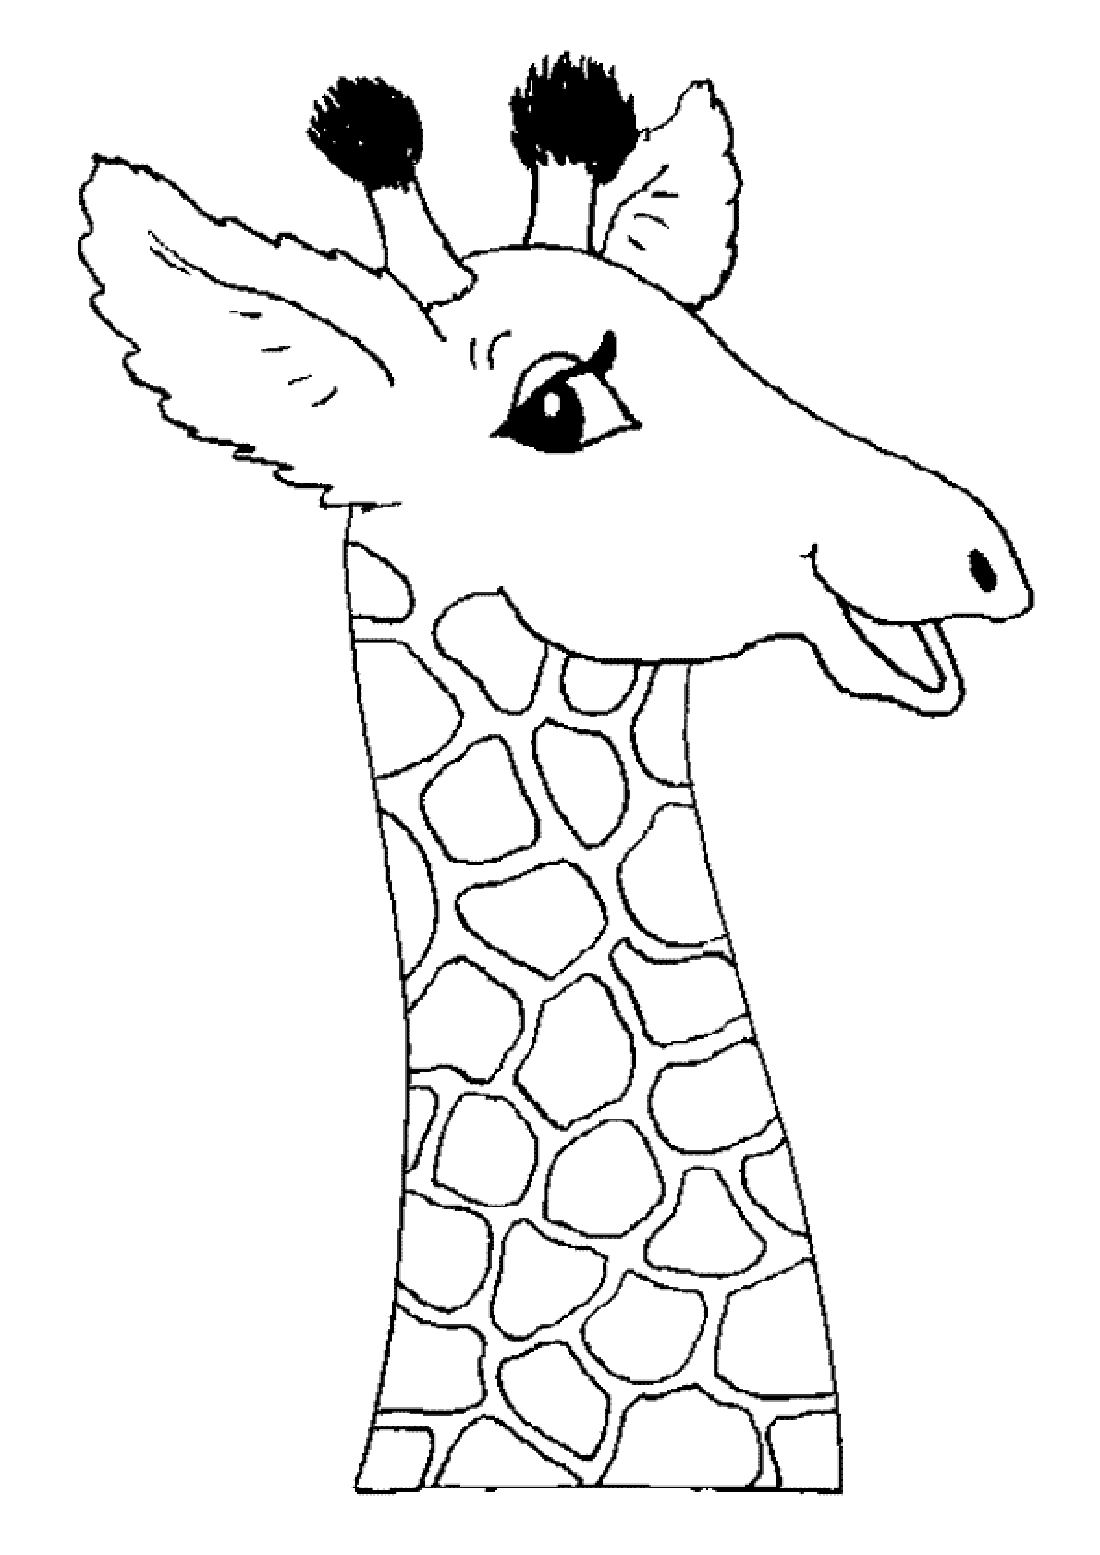 Download Giraffes free to color for kids - Giraffes Kids Coloring Pages